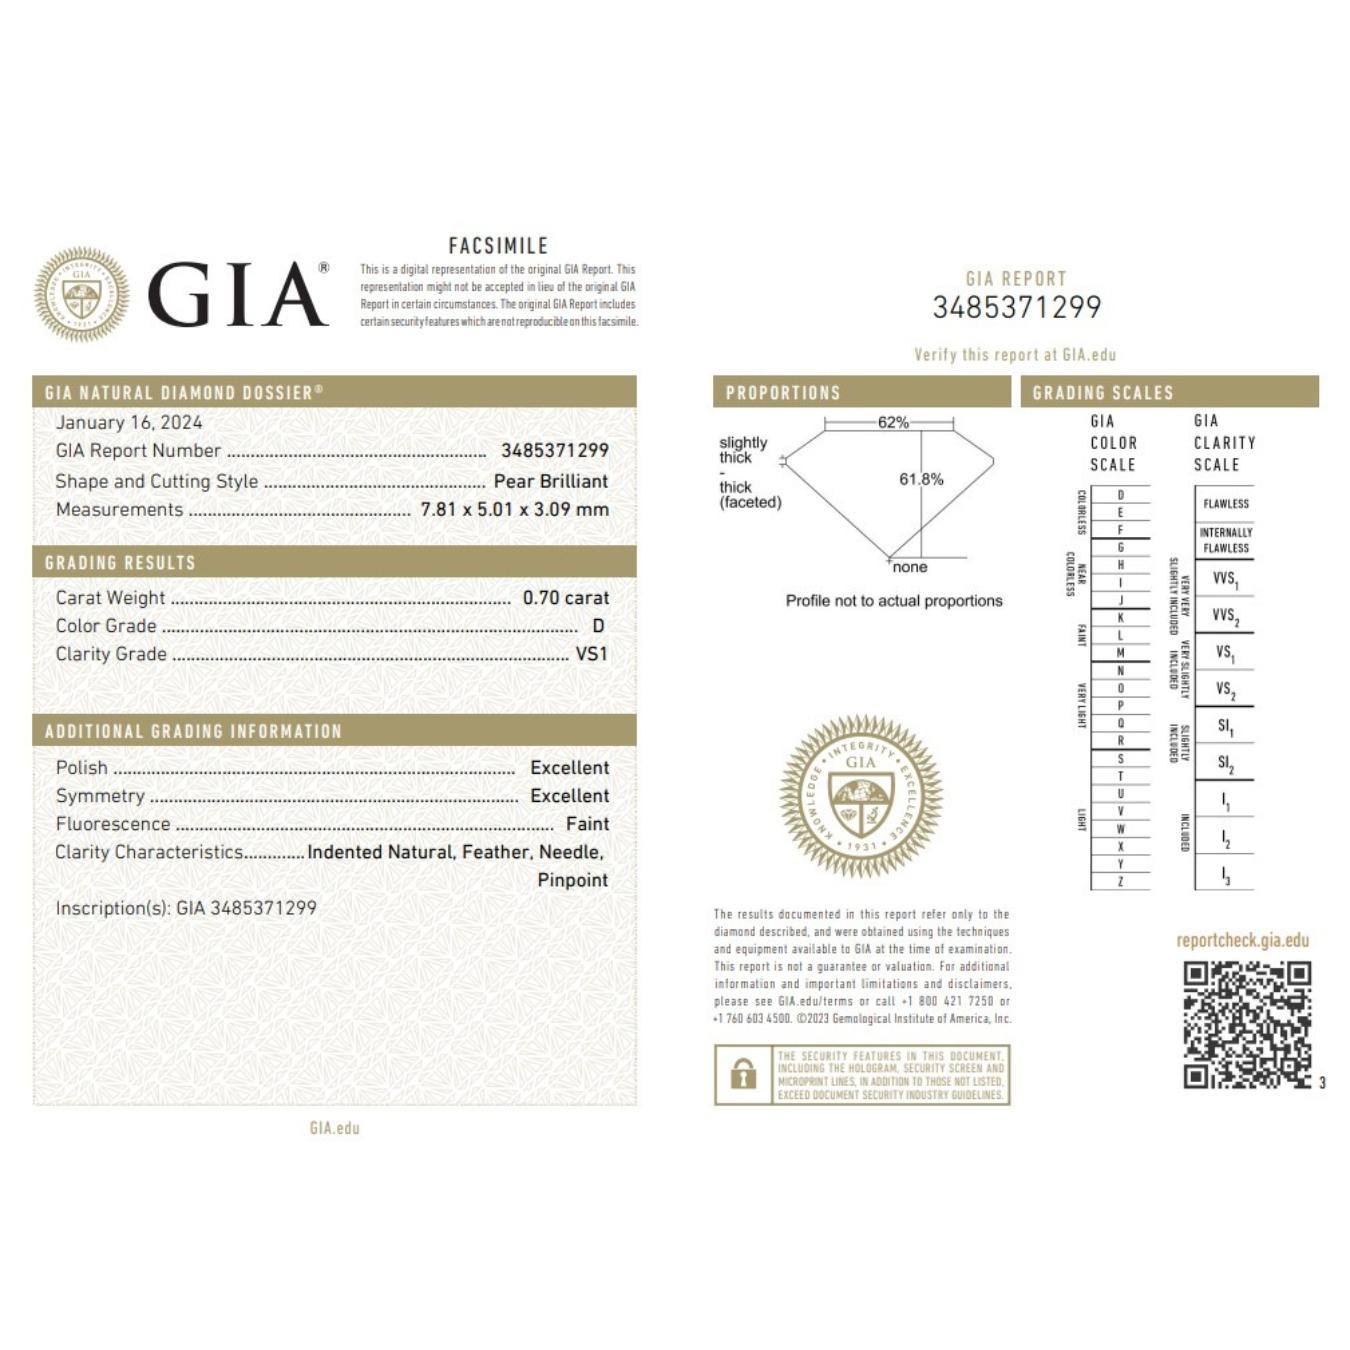 Precious 1pc Ideal Cut Natural Diamond w/0.70 ct - GIA Certified

Introducing this precious ideal cut 0.70 carat pear shaped diamond. This ideal cut diamond, certified by GIA  guarantees authenticity and quality. The elegant pear shape adds a touch